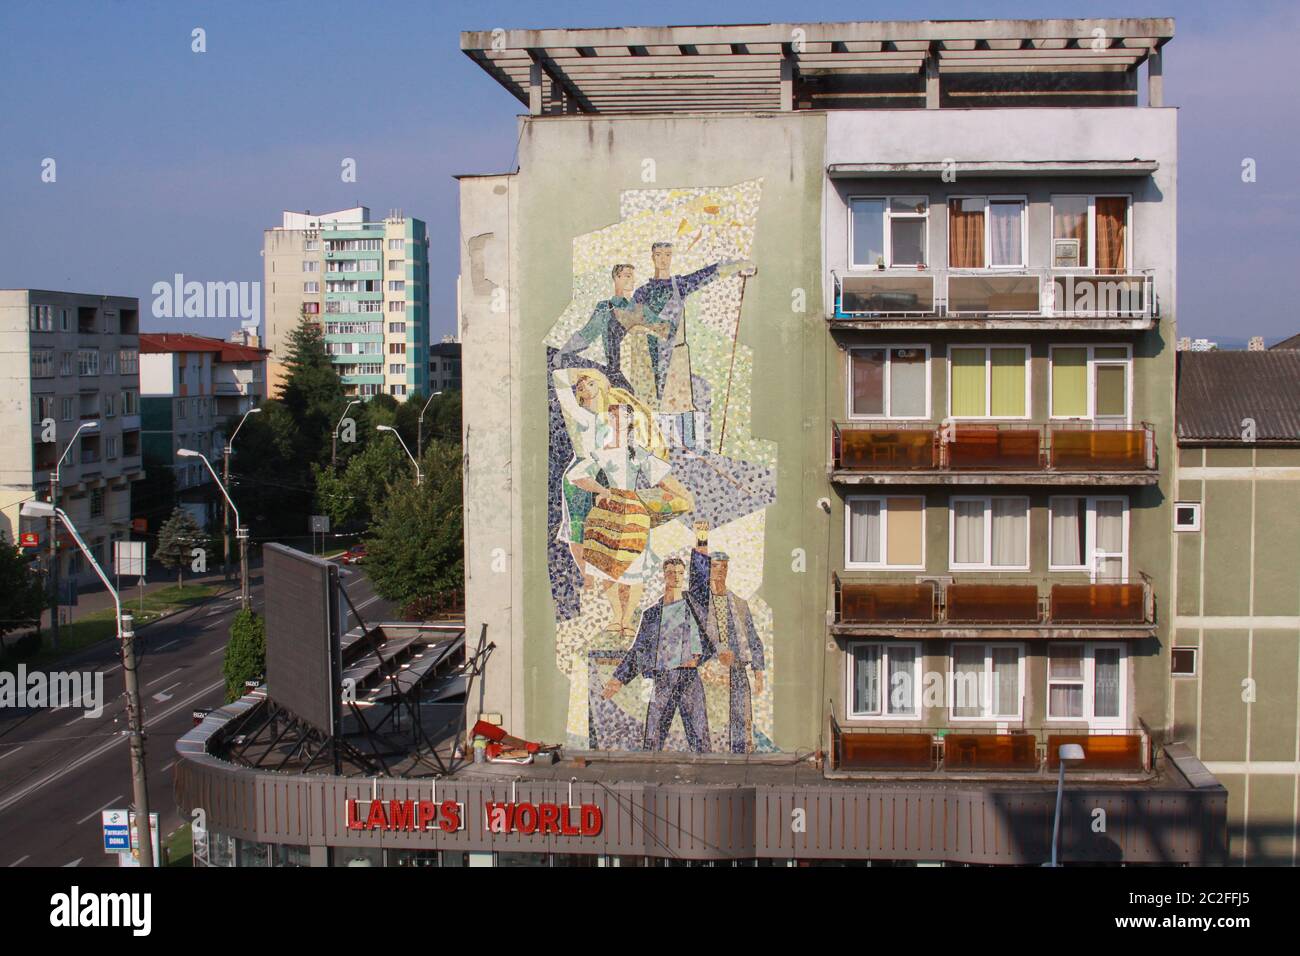 Socialist building and socialist realism mural art on building in Baia Mare, Maramures, Romania Stock Photo